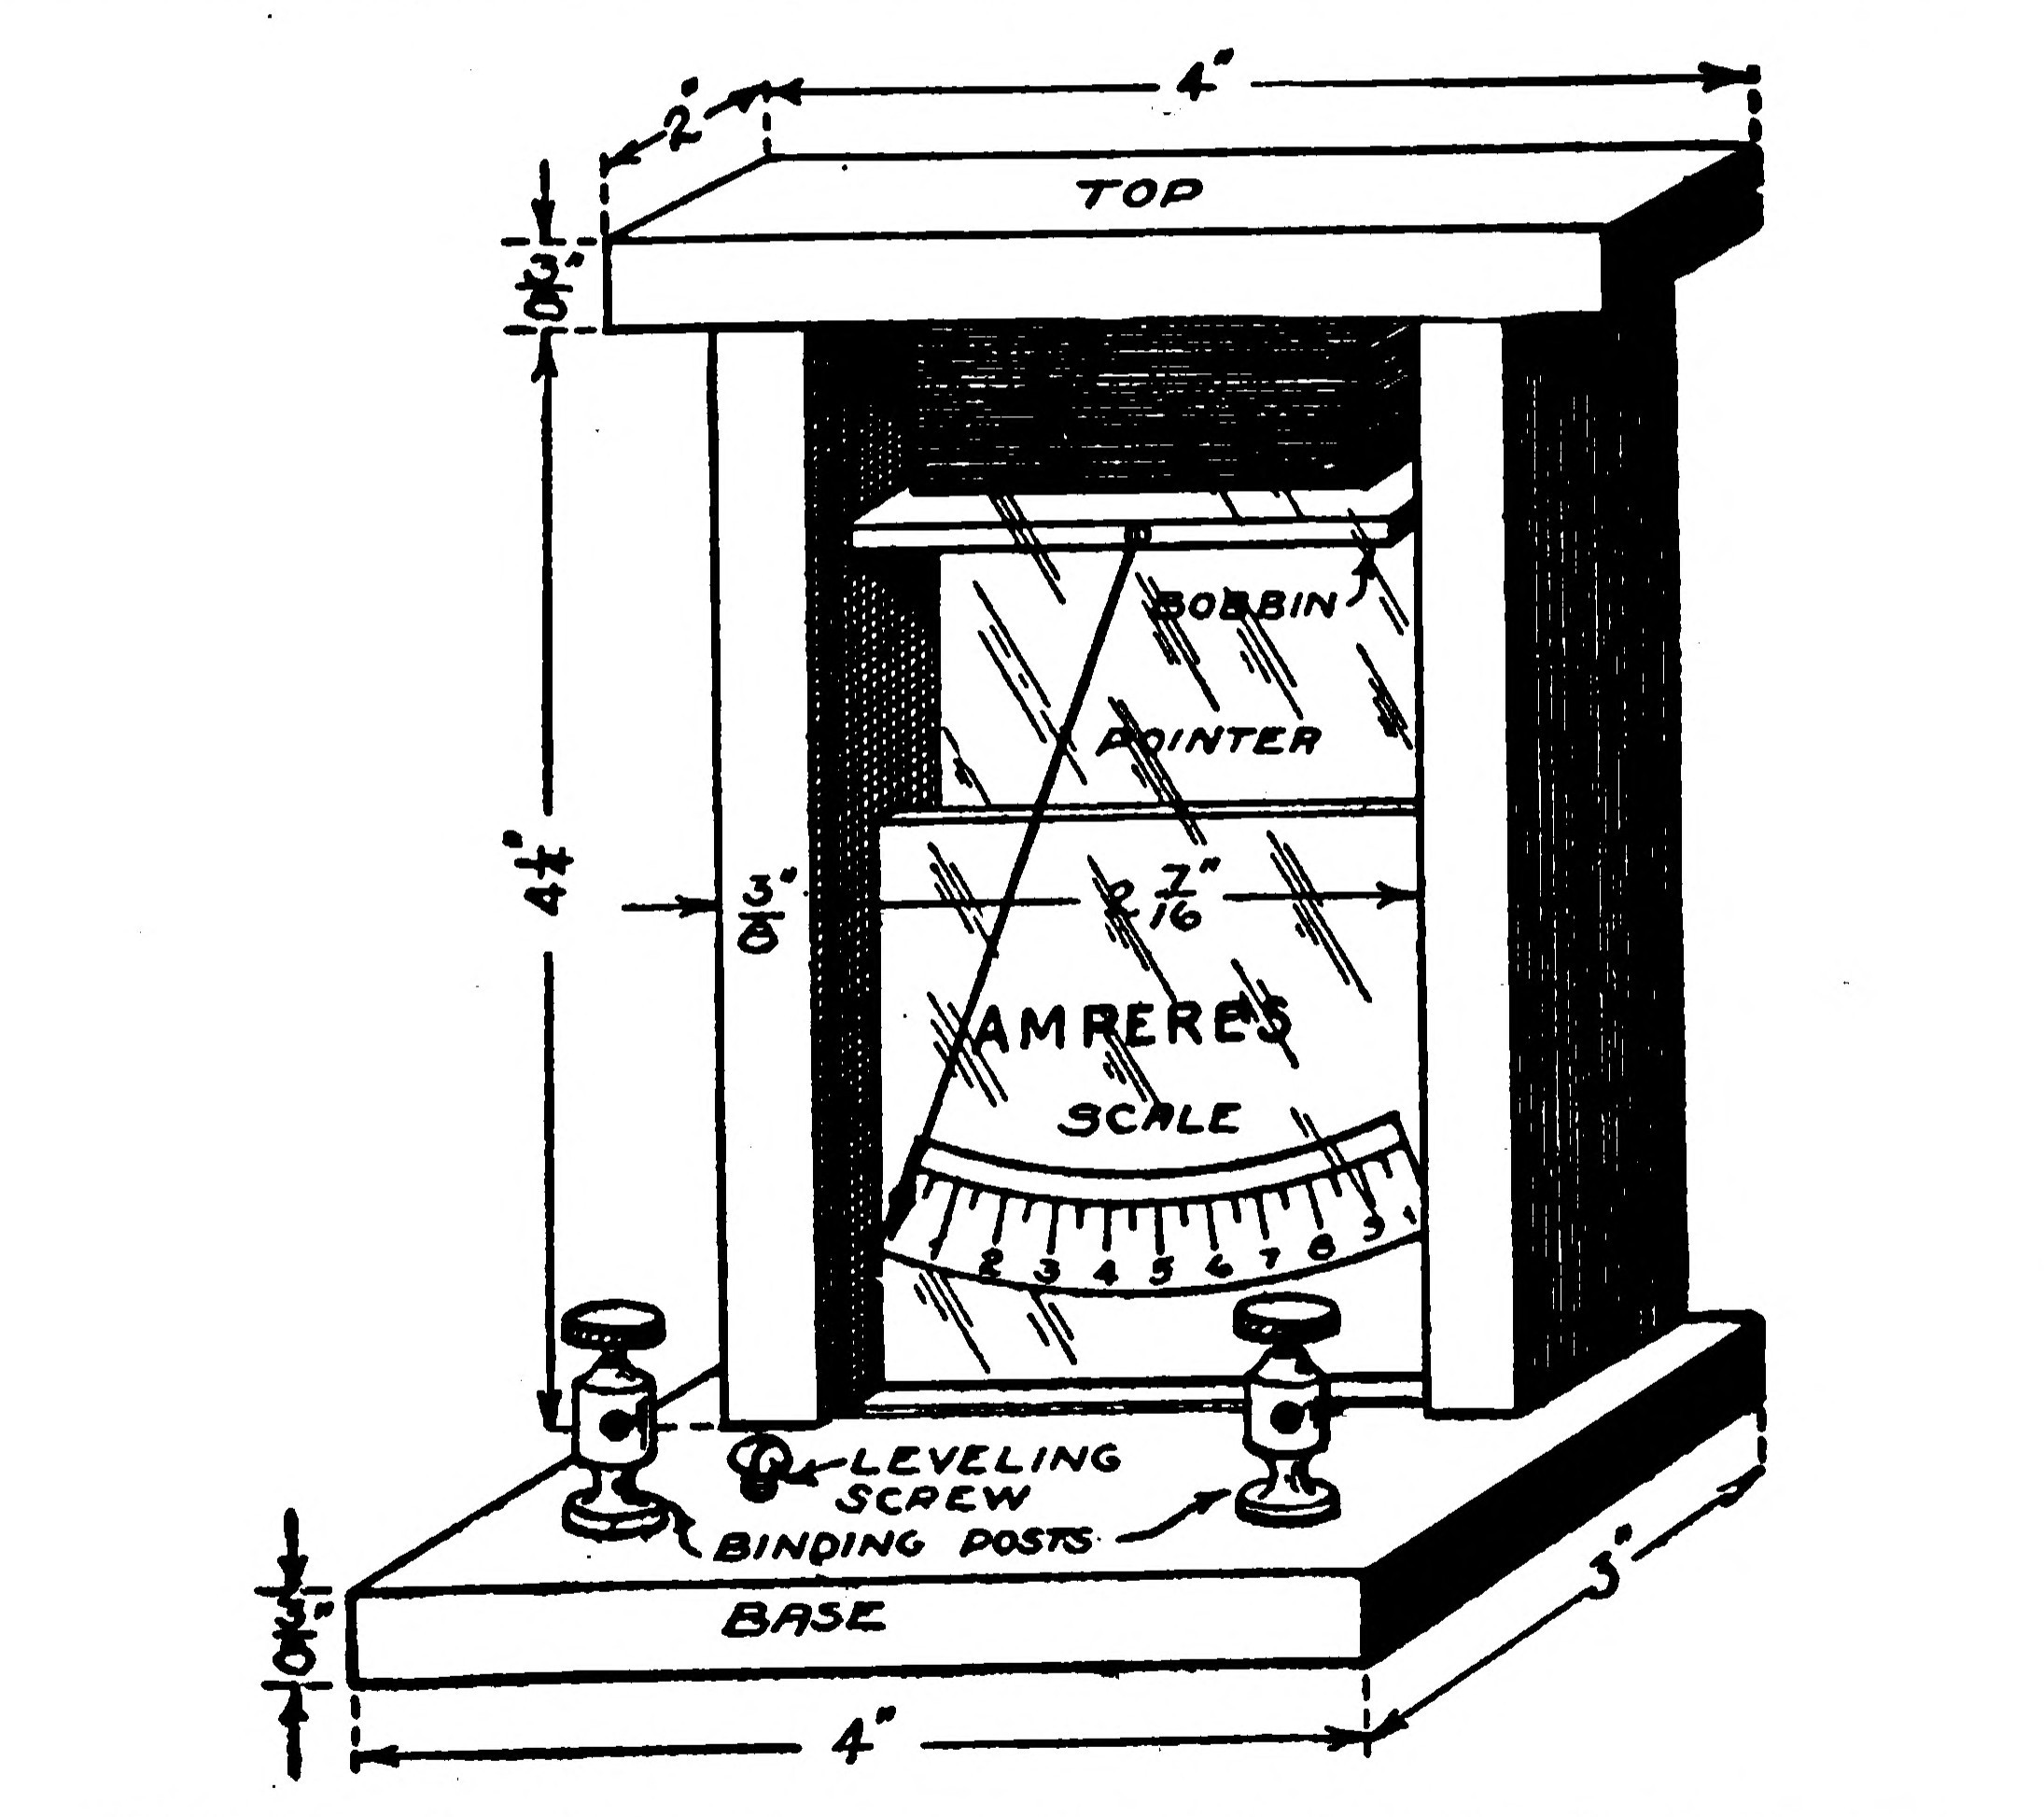 FIG. 71—An Ammeter so constructed that the Scale is at the bottom.